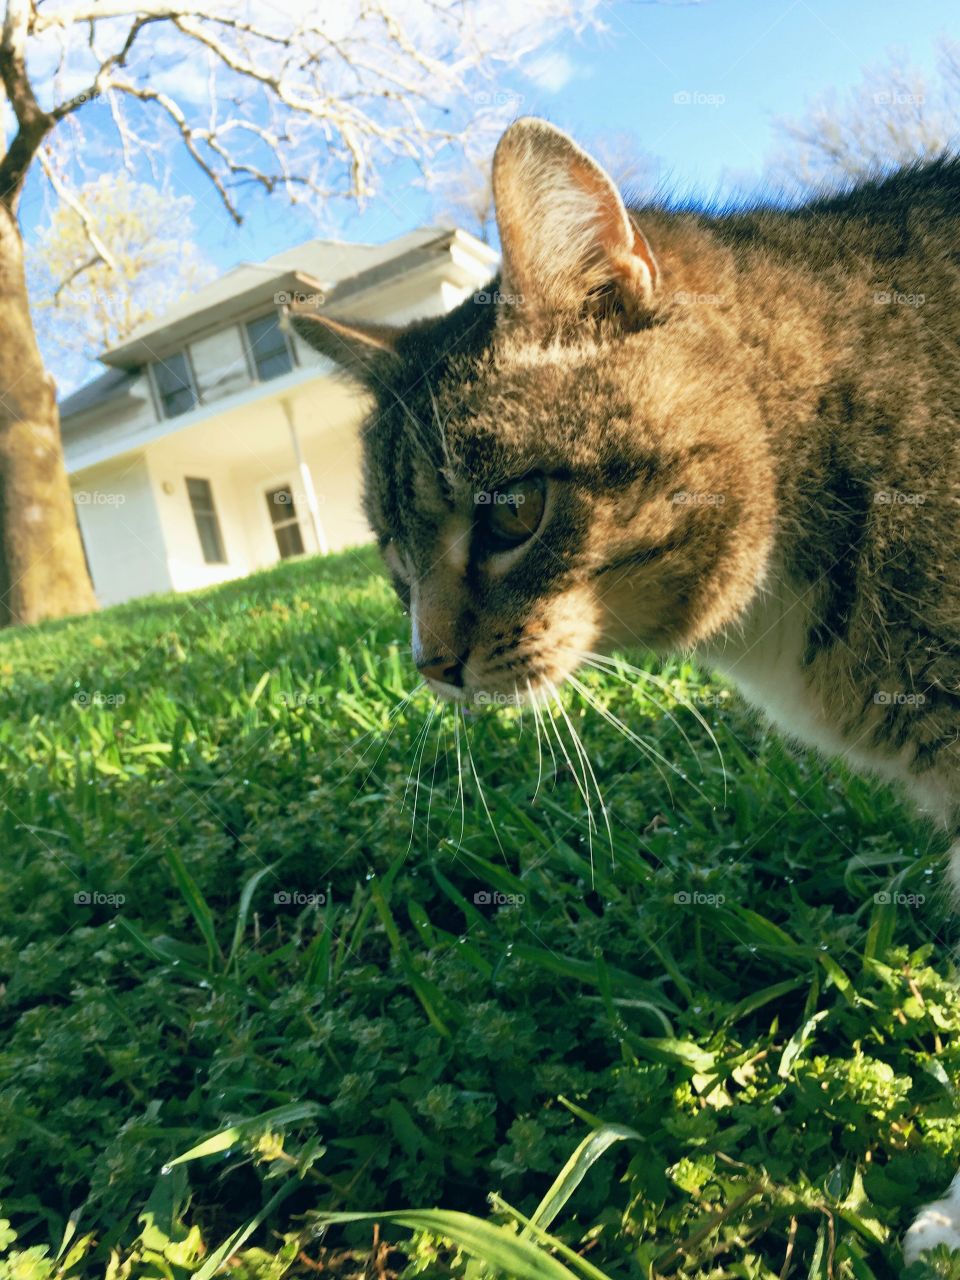 On the Hunt - closeup ground level side view of grey tabby cat in grass looking off camera, white house and large tree in background on a sunny spring morning